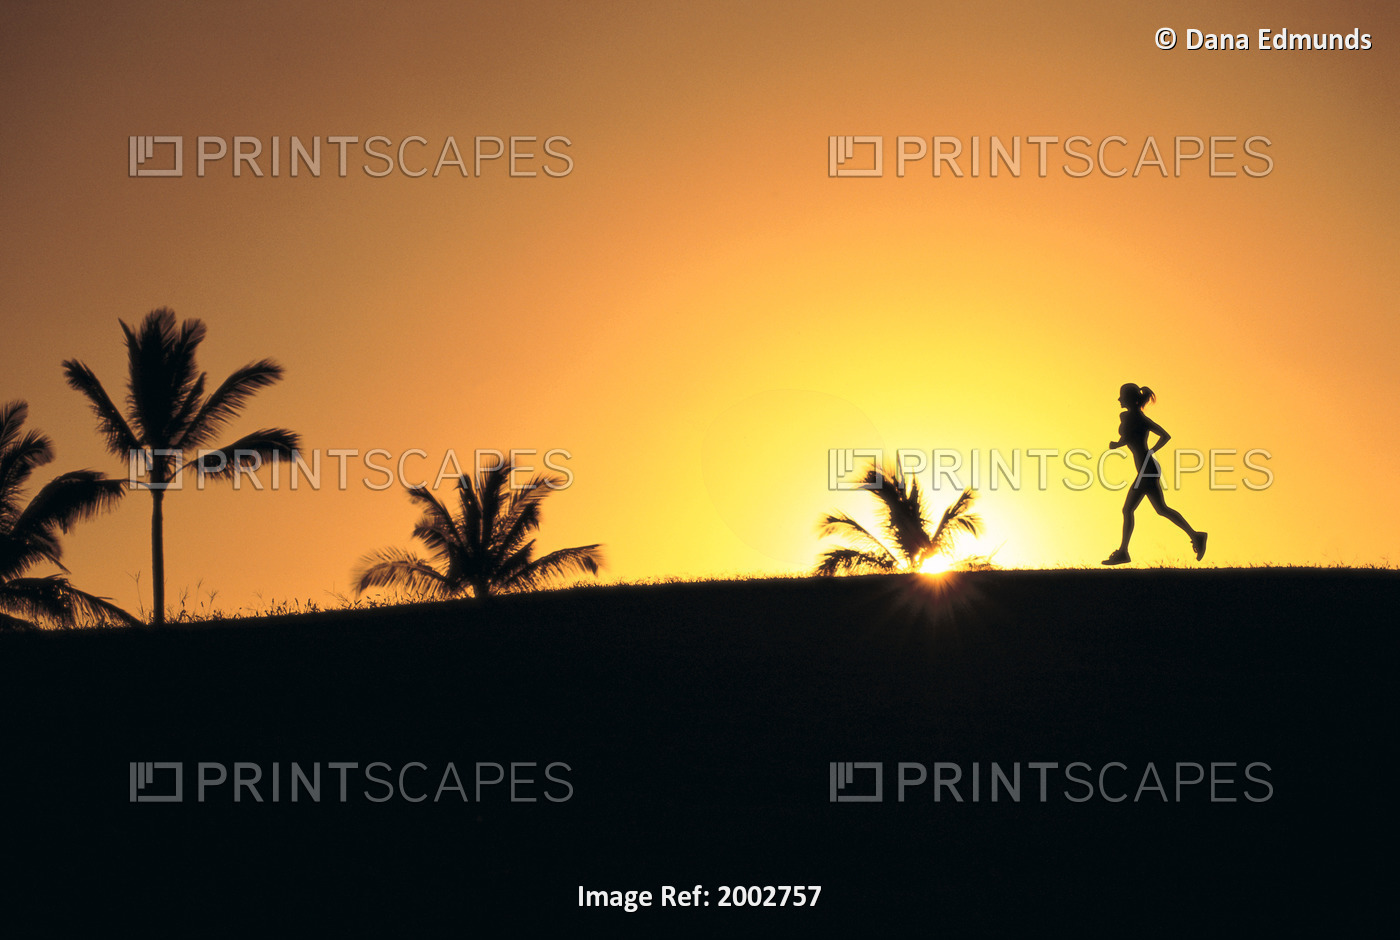 Woman In Distance, Silhouetted Running At Sunset, Palm Trees